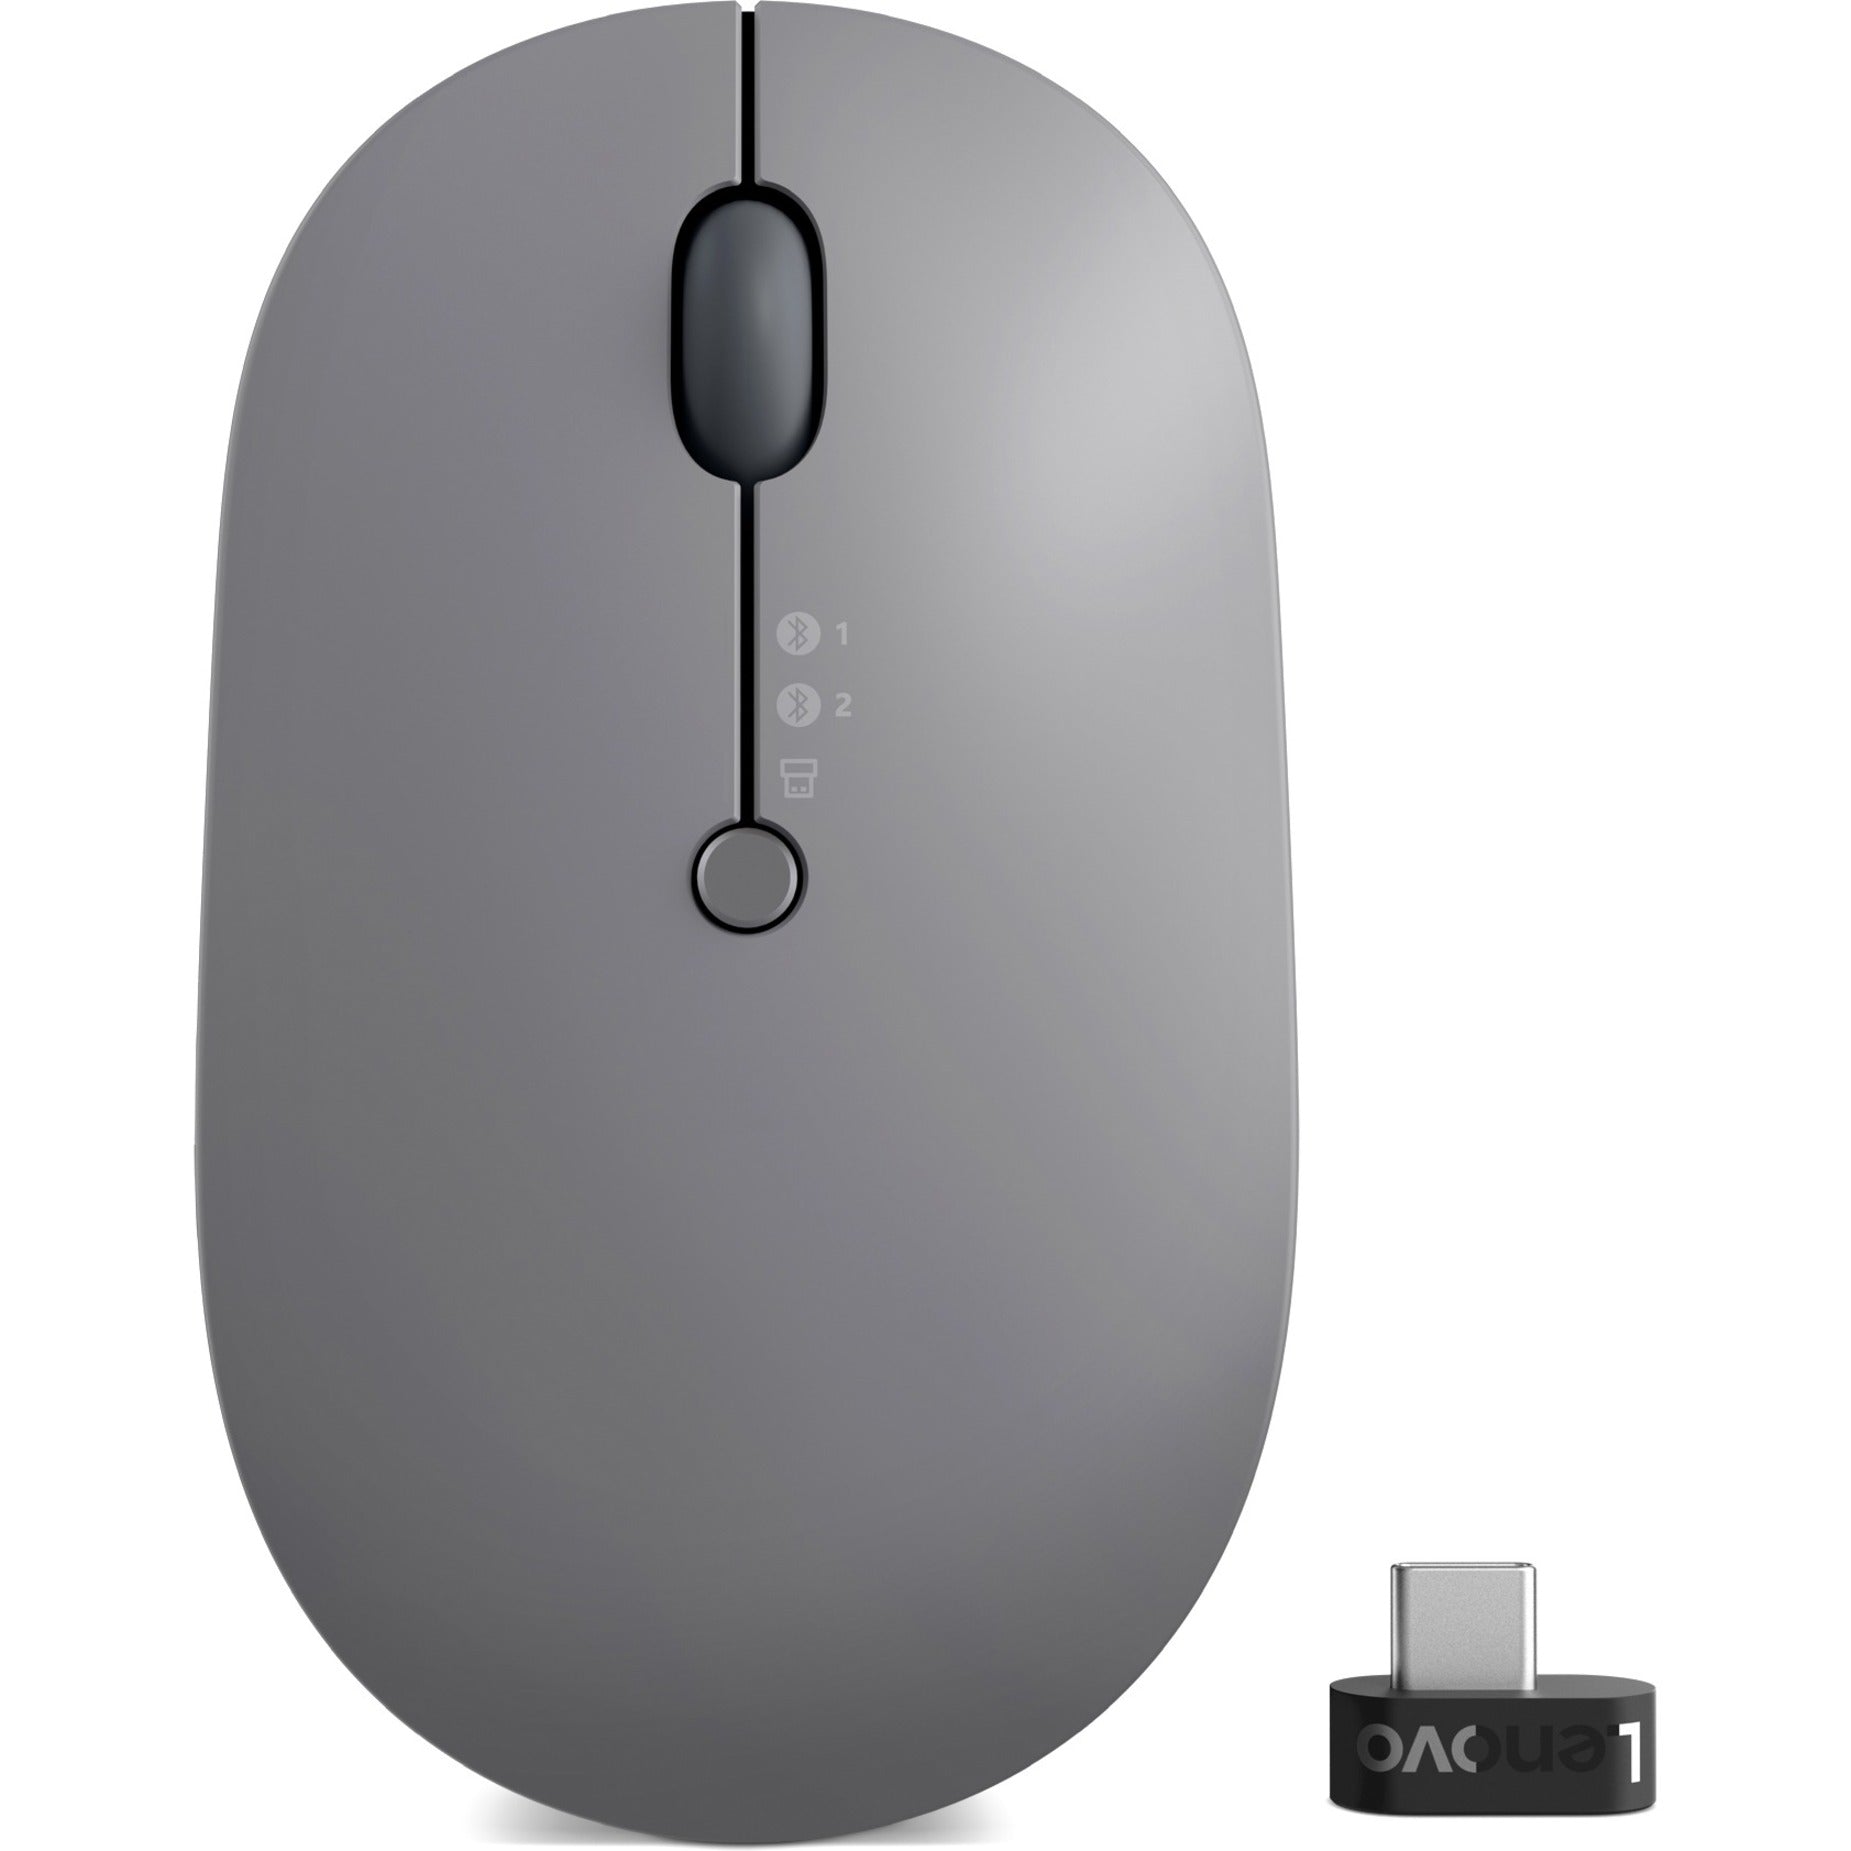 Lenovo 4Y51C21217 Go Wireless Multi-Device Mouse, Rechargeable, Bluetooth 5, 2400 dpi, 2.4 GHz, USB Type C